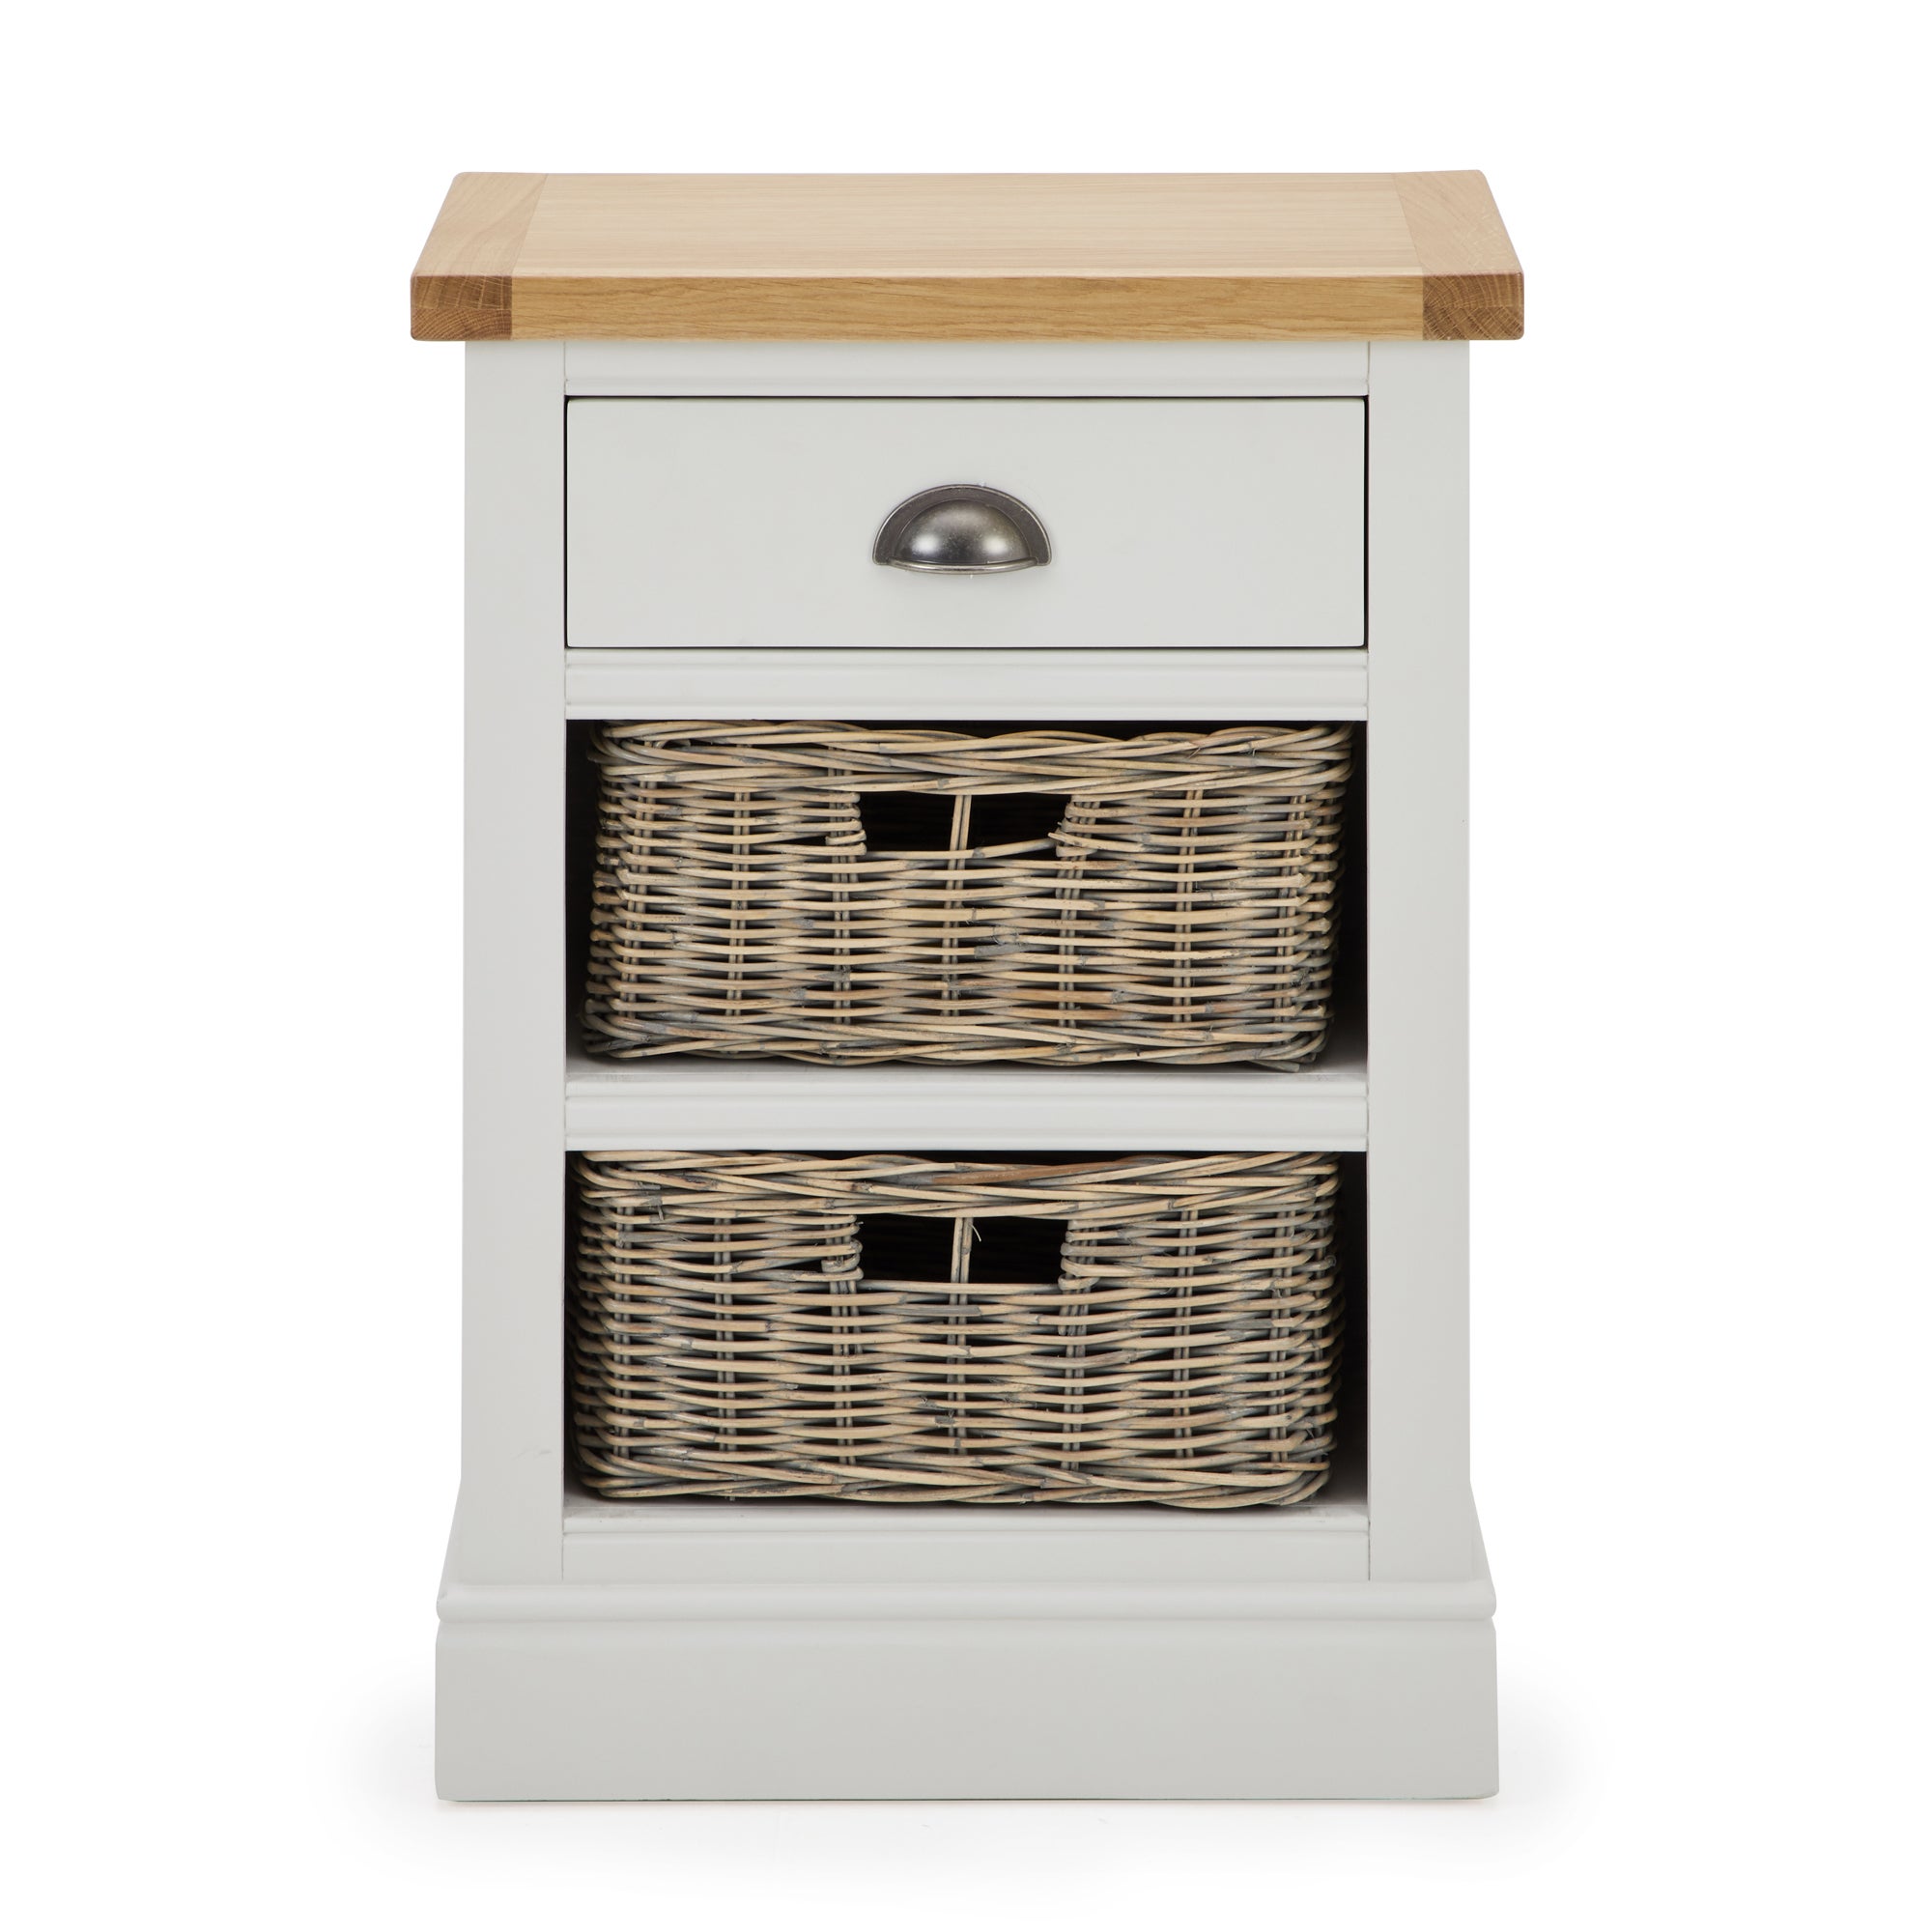 Compton Ivory Tall Side Table with Baskets Cream